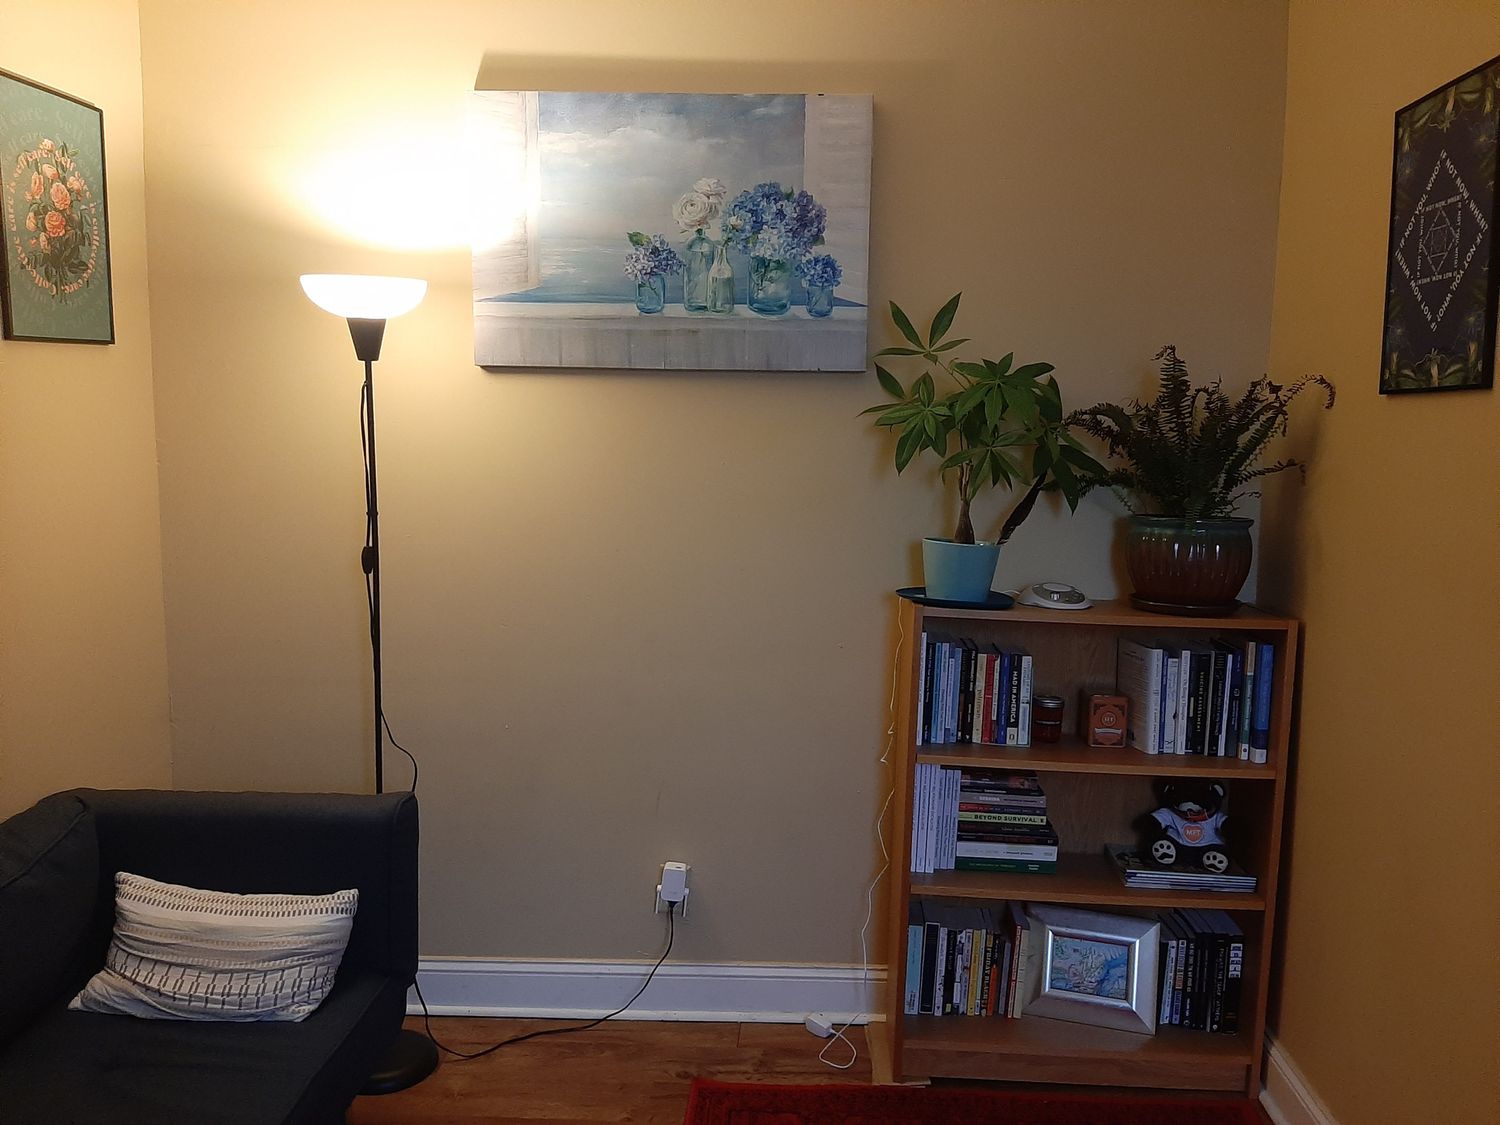 Gallery Photo of A photo of Renya's office that includes a bookcase, plants, a couch, a lamp, a red rug, and three pictures.